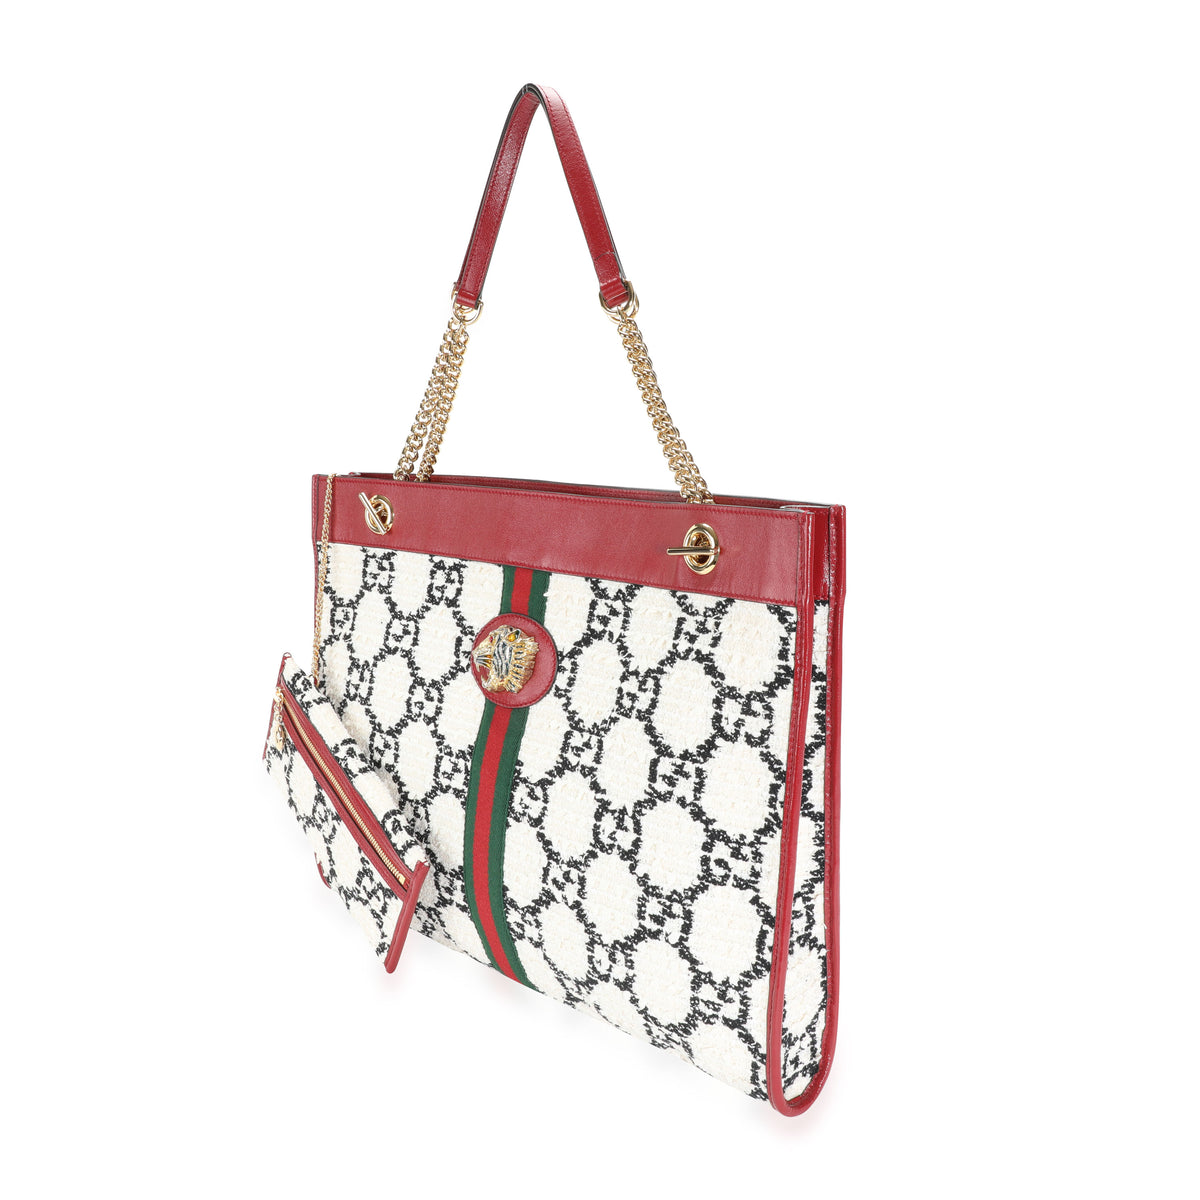 Gucci GG White Tweed & Romantic Cherry Leather Large Rajah Chain Tote